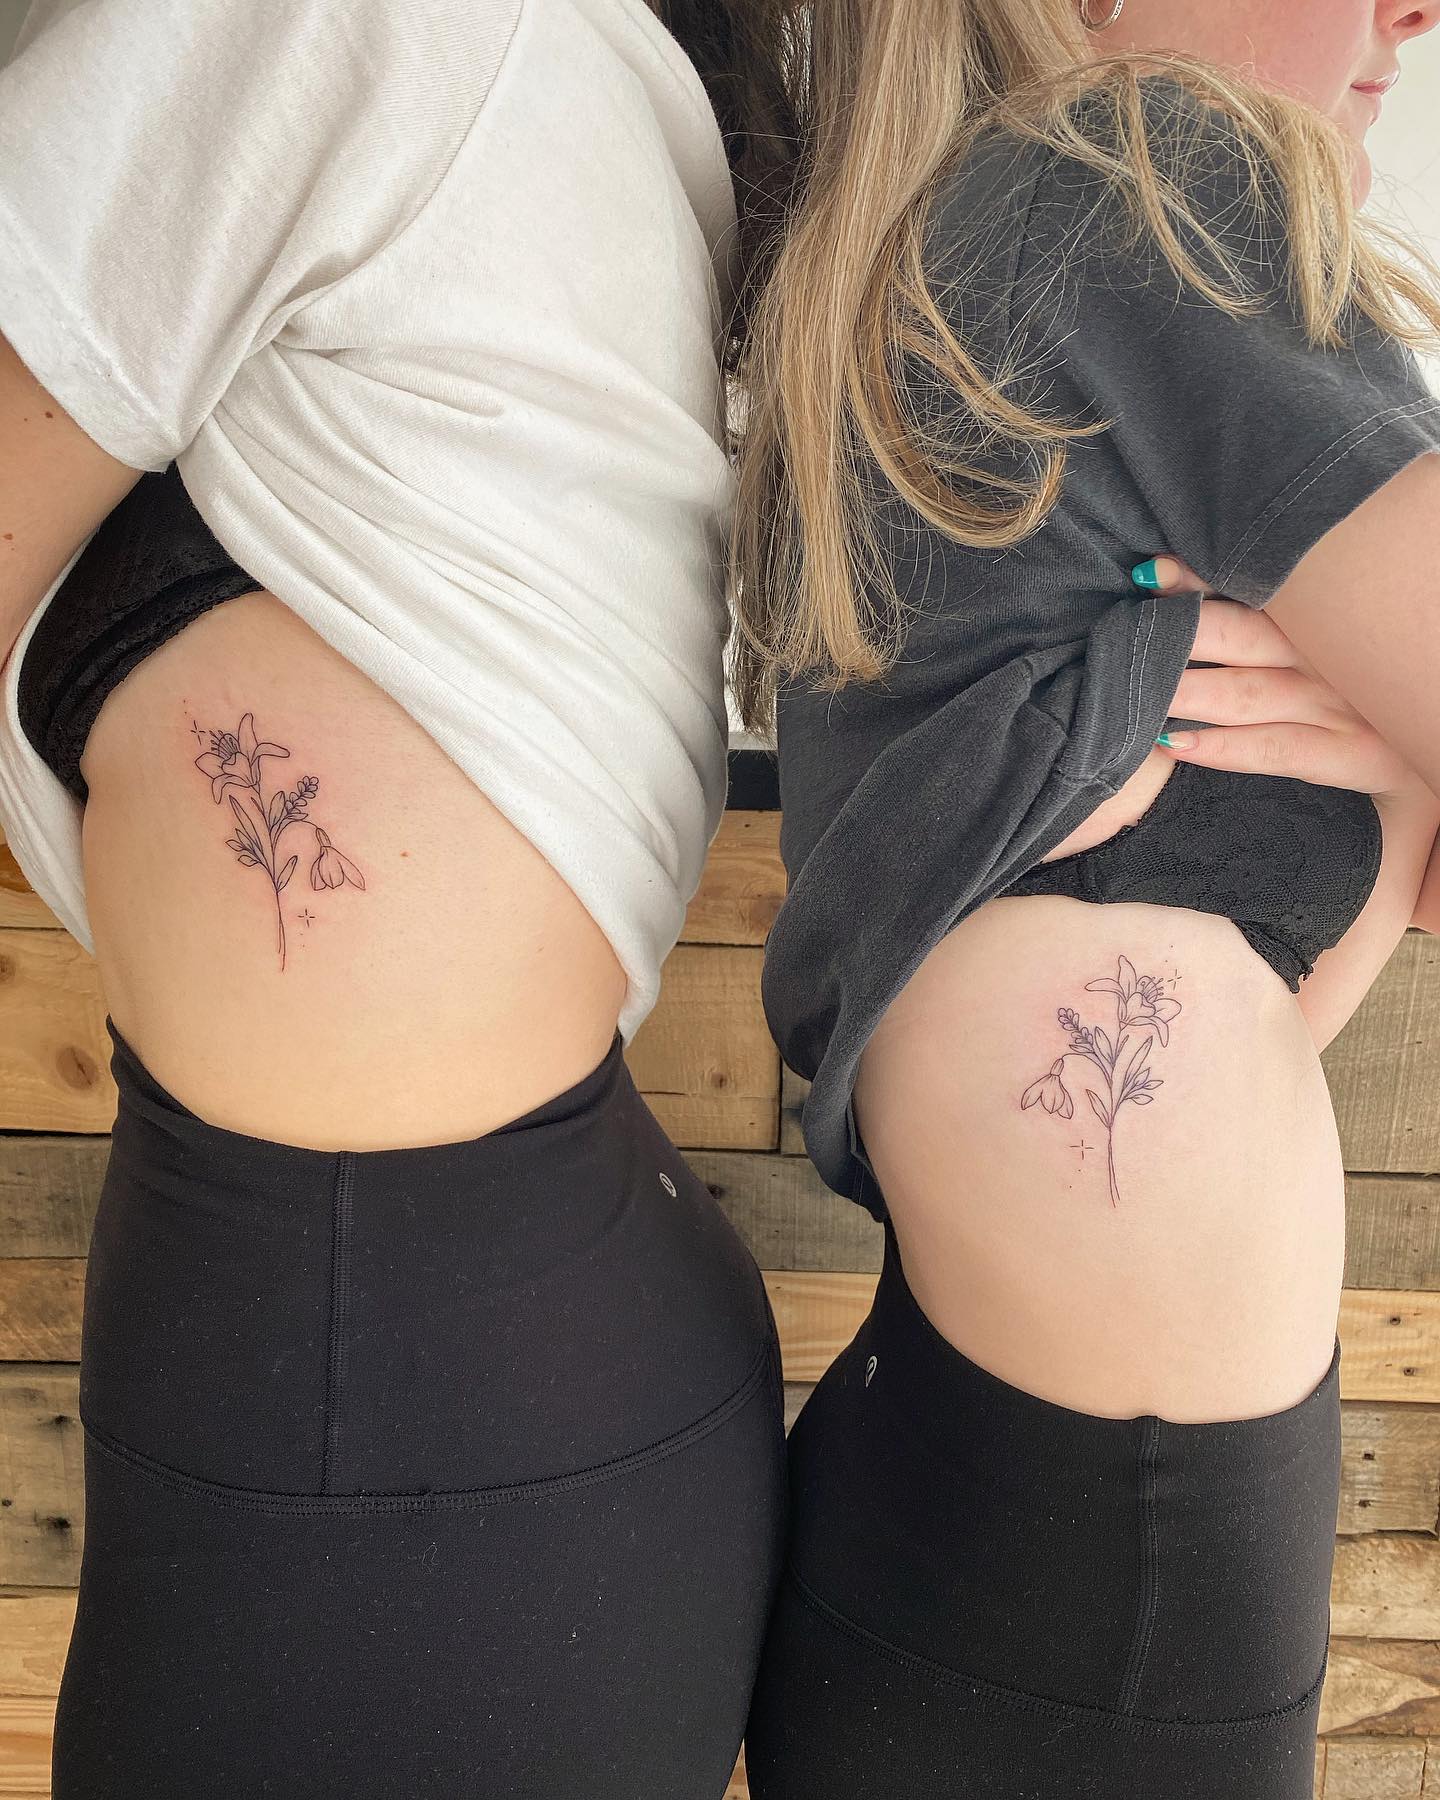 45 Sister Tattoo Ideas That Speaks Volumes About Your Relationship in a  Symbolic Way  BrassLook